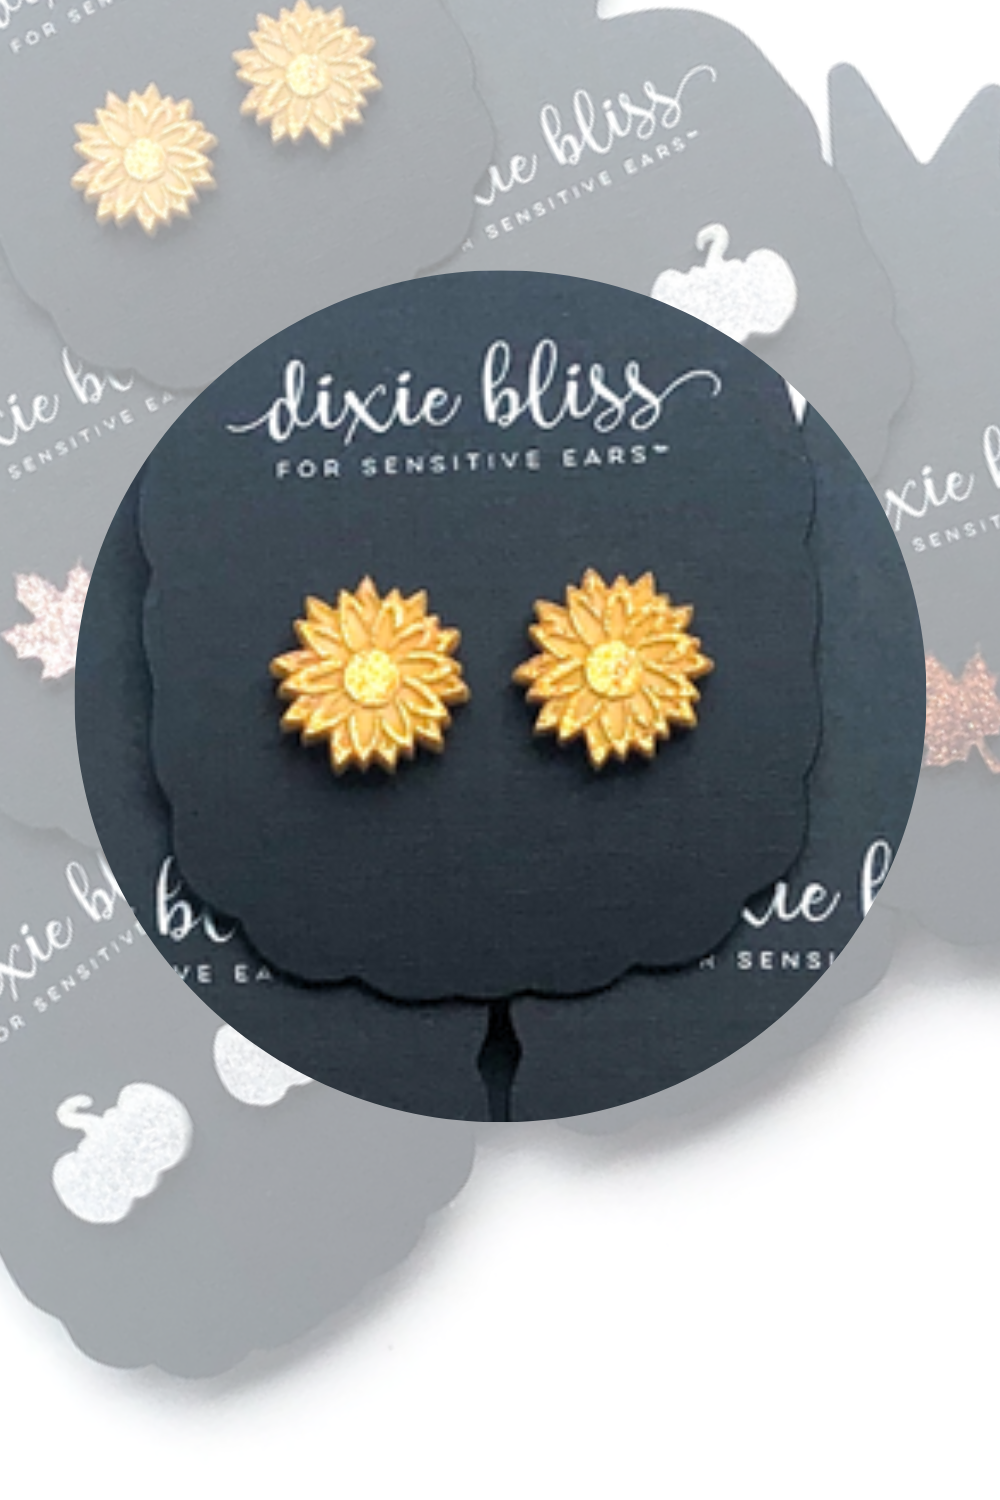 Hypoallergenic Earrings for Sensitive Ears. Made in the USA by a woman-owned company Dixie Bliss Earrings Brand. Safe Earrings. Autumn Things. Pumpkin, Maple Leaf, Sunflower Earrings Fall Jewelry